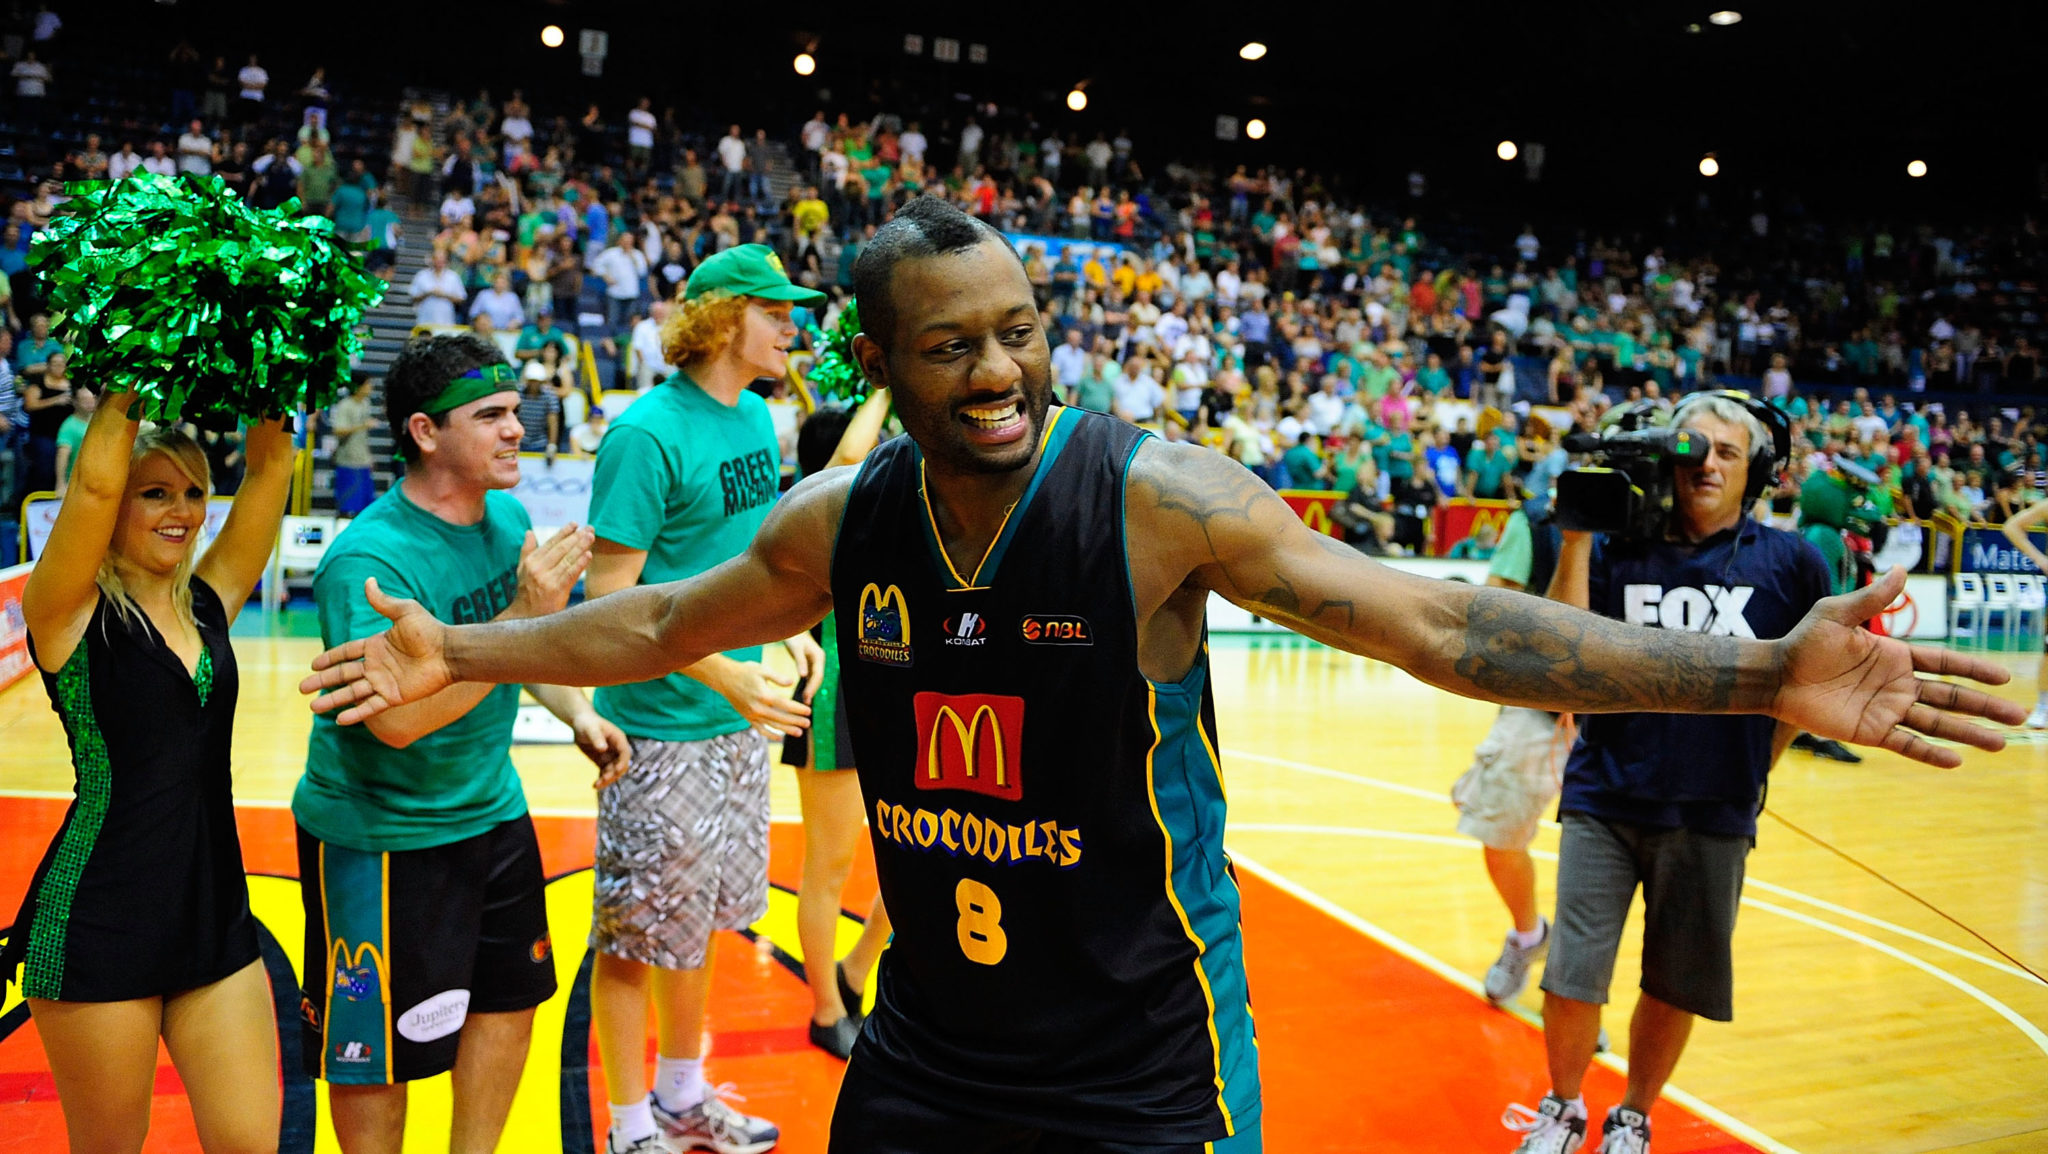 TOWNSVILLE, AUSTRALIA - FEBRUARY 24:  Corey Williams of the Crocodiles acknowledges the crowd after winning  game two of the NBL semi final series between the Townsville Crocodiles and the Wollongong Hawks at the Townsville Entertainment Centre on February 24, 2010 in Townsville, Australia.  (Photo by Ian Hitchcock/Getty Images)